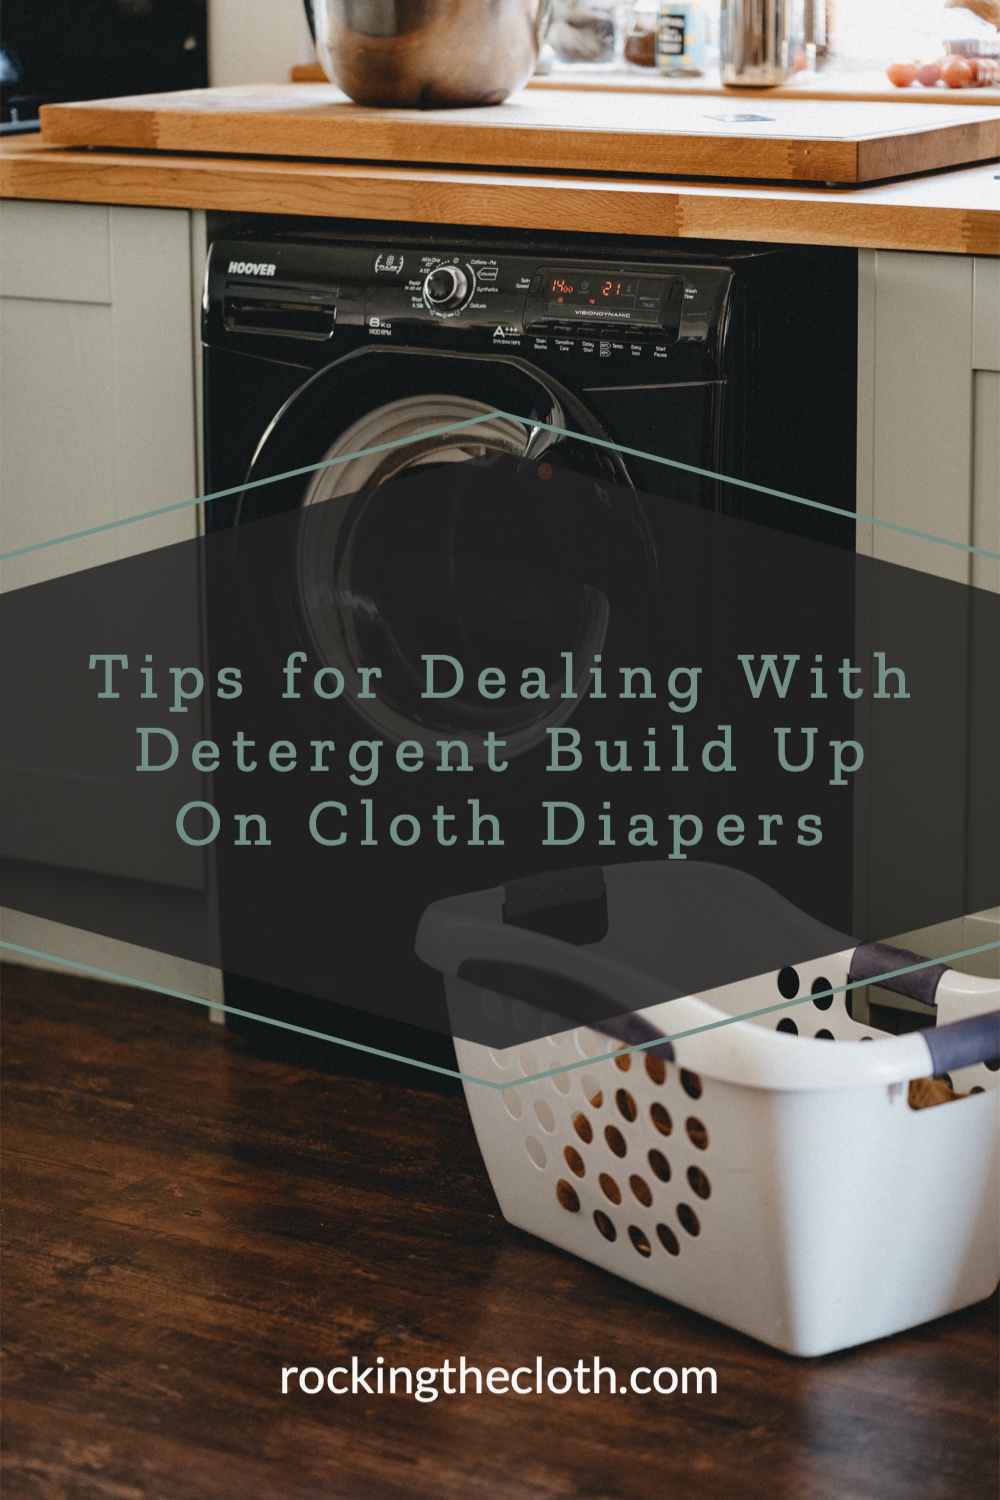 Tips for Dealing With Detergent Build Up On Cloth Diapers